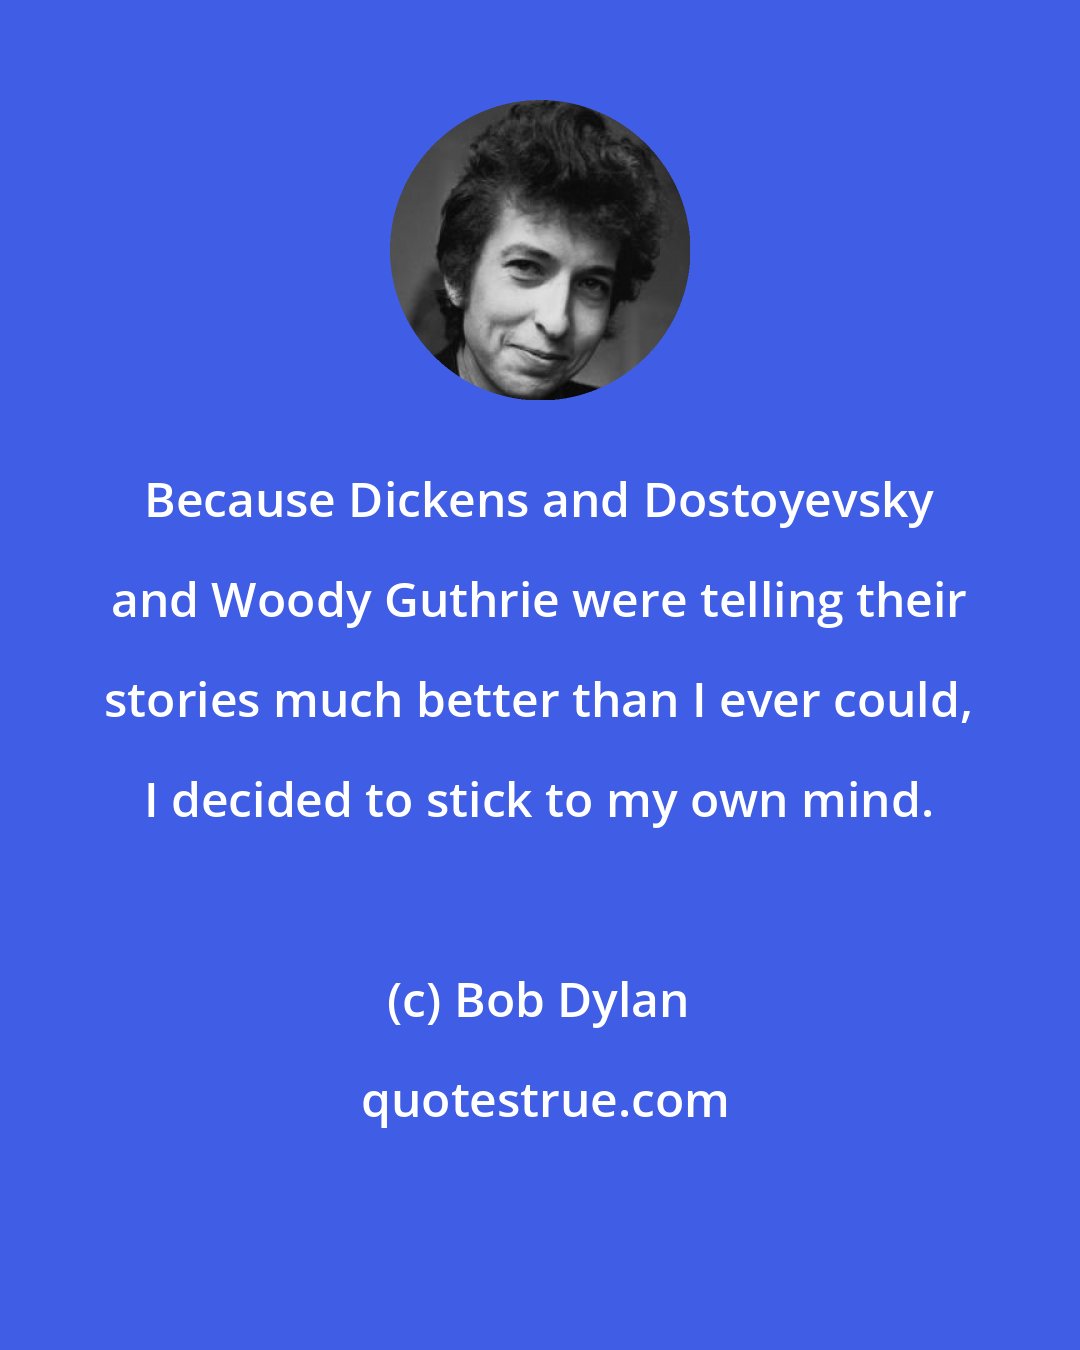 Bob Dylan: Because Dickens and Dostoyevsky and Woody Guthrie were telling their stories much better than I ever could, I decided to stick to my own mind.